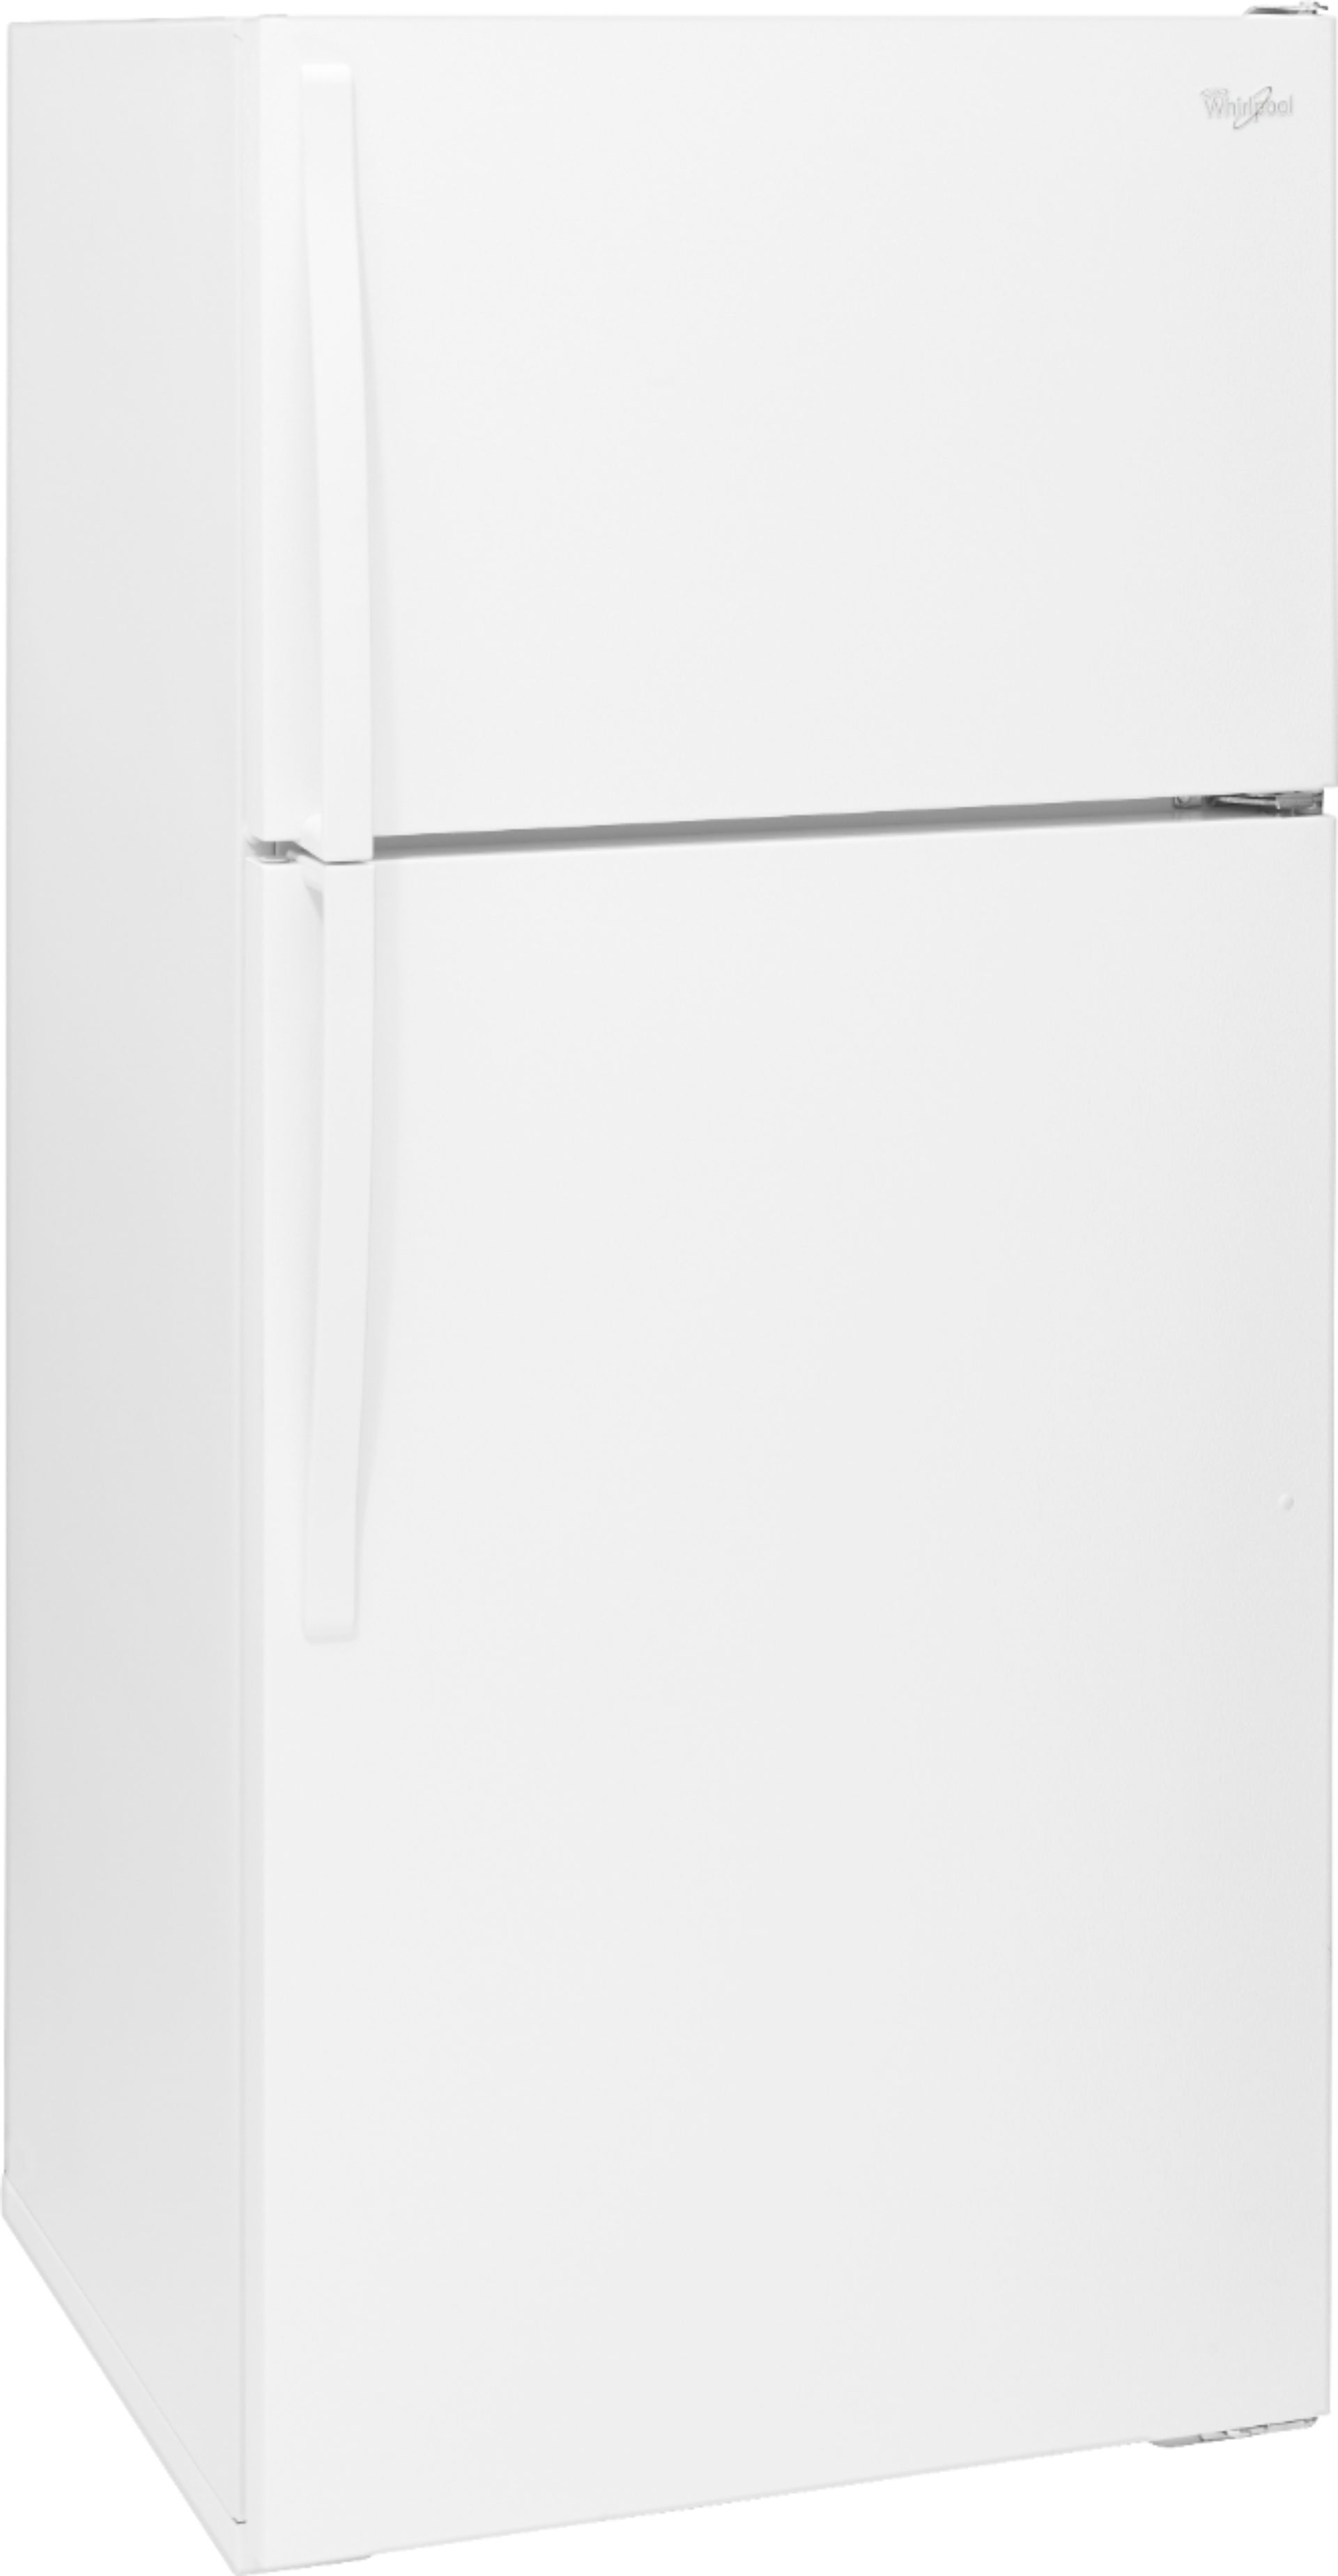 Angle View: GE - 18.2 Cu. Ft. Frost-Free Top-Freezer Refrigerator - White